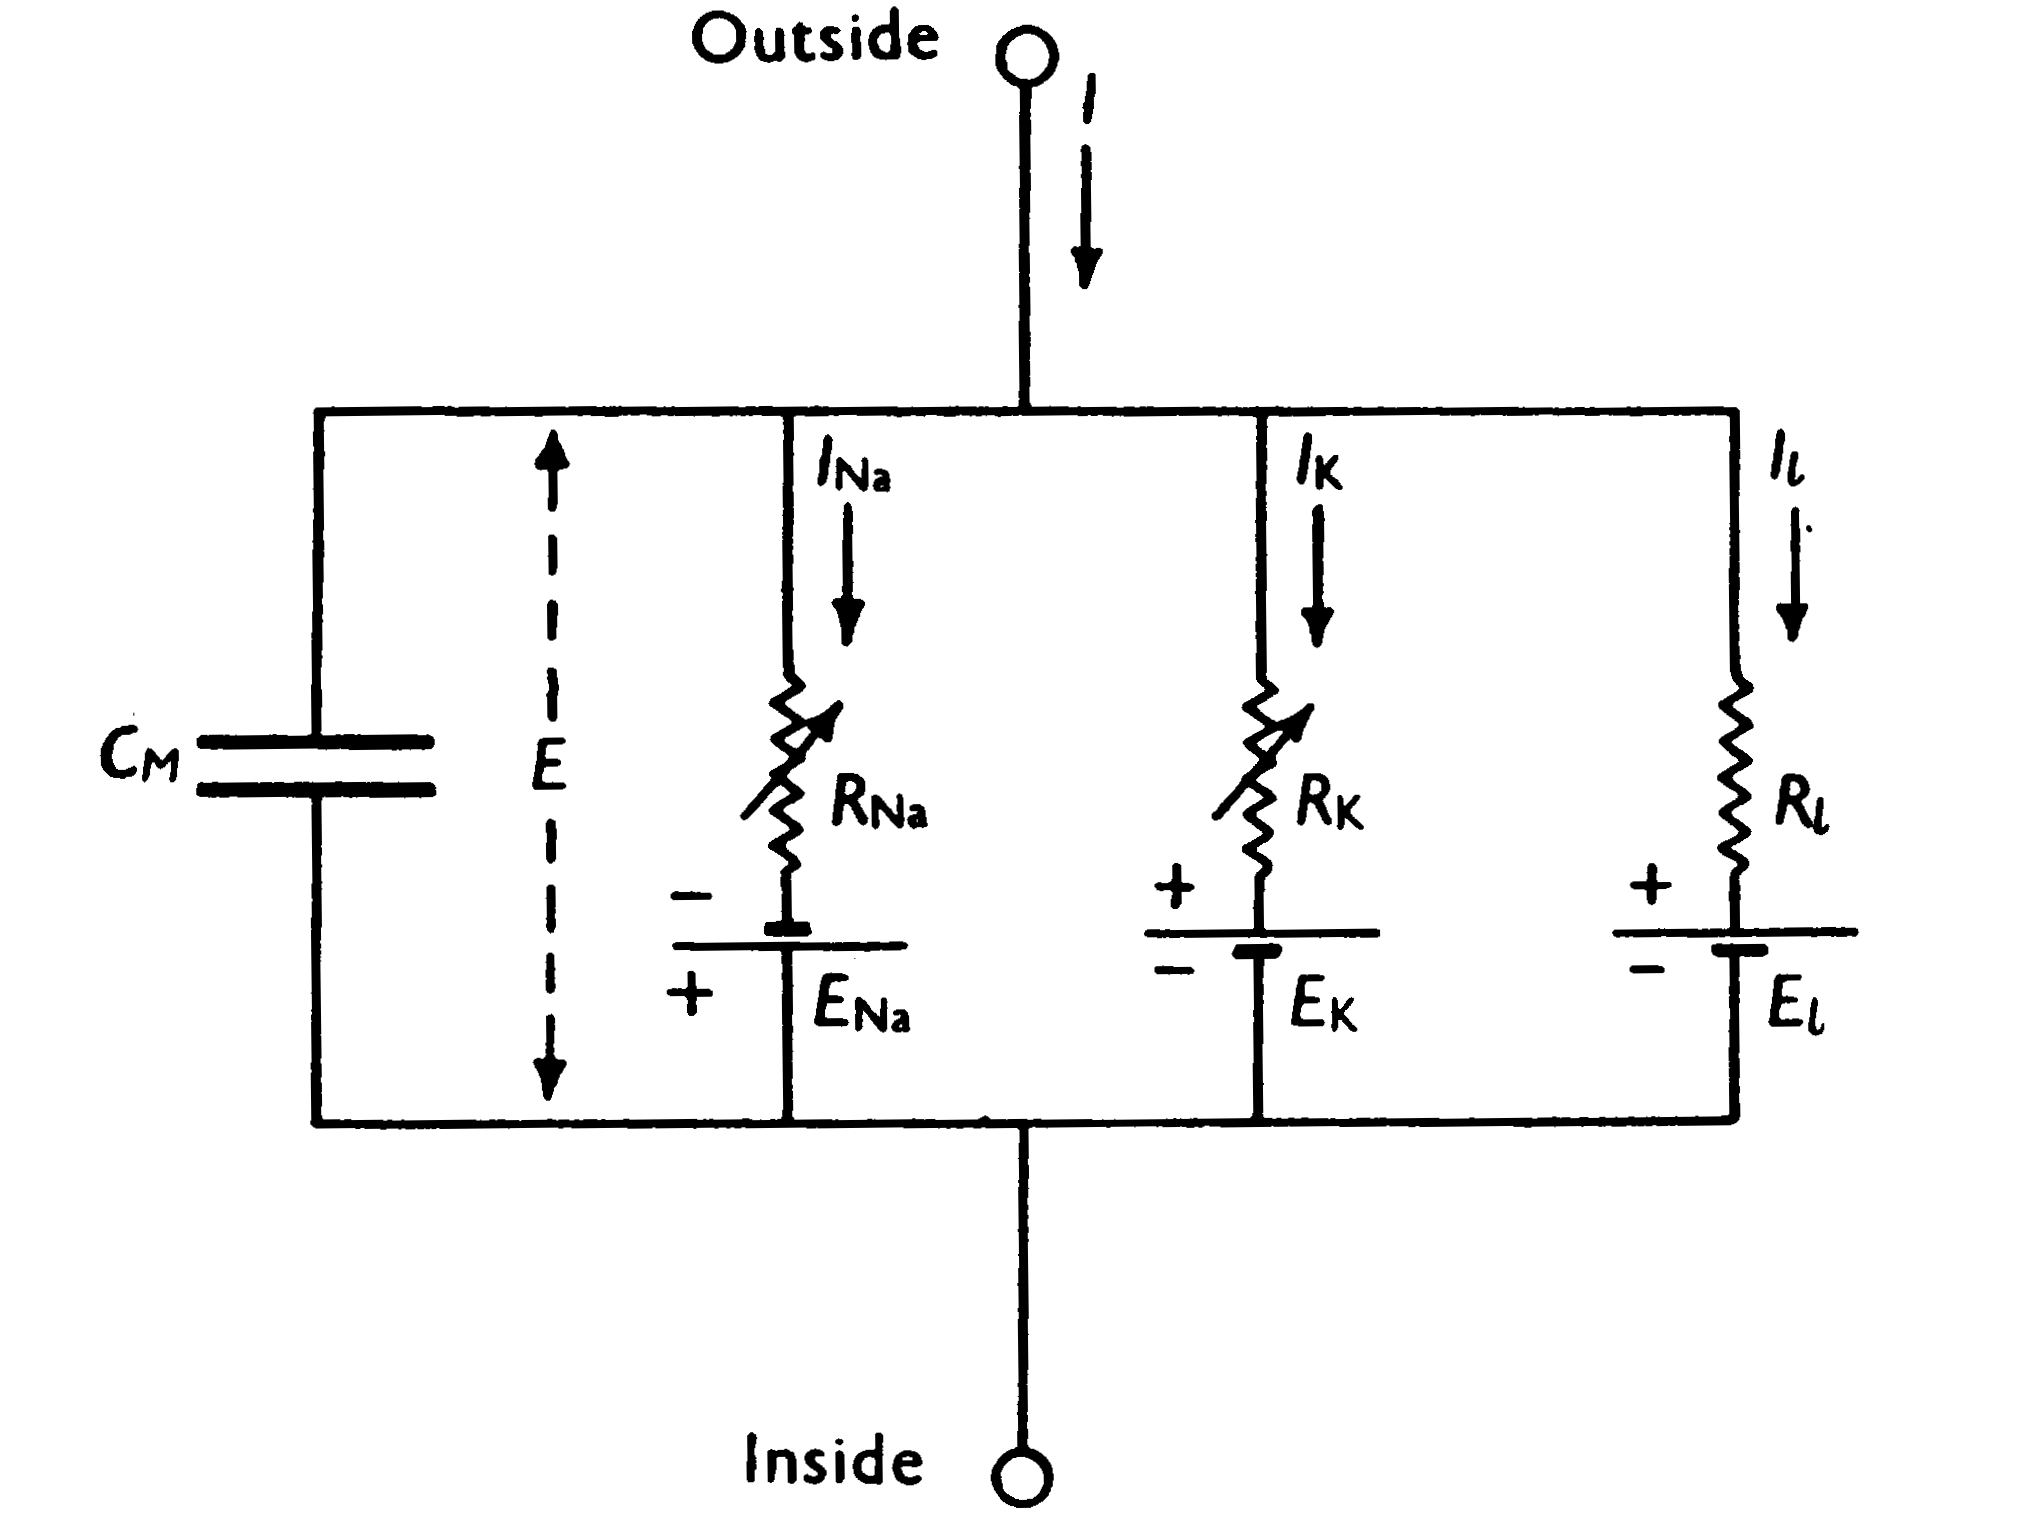 Figure 2: Hodgkin-Huxley model of voltage-gated ion channels